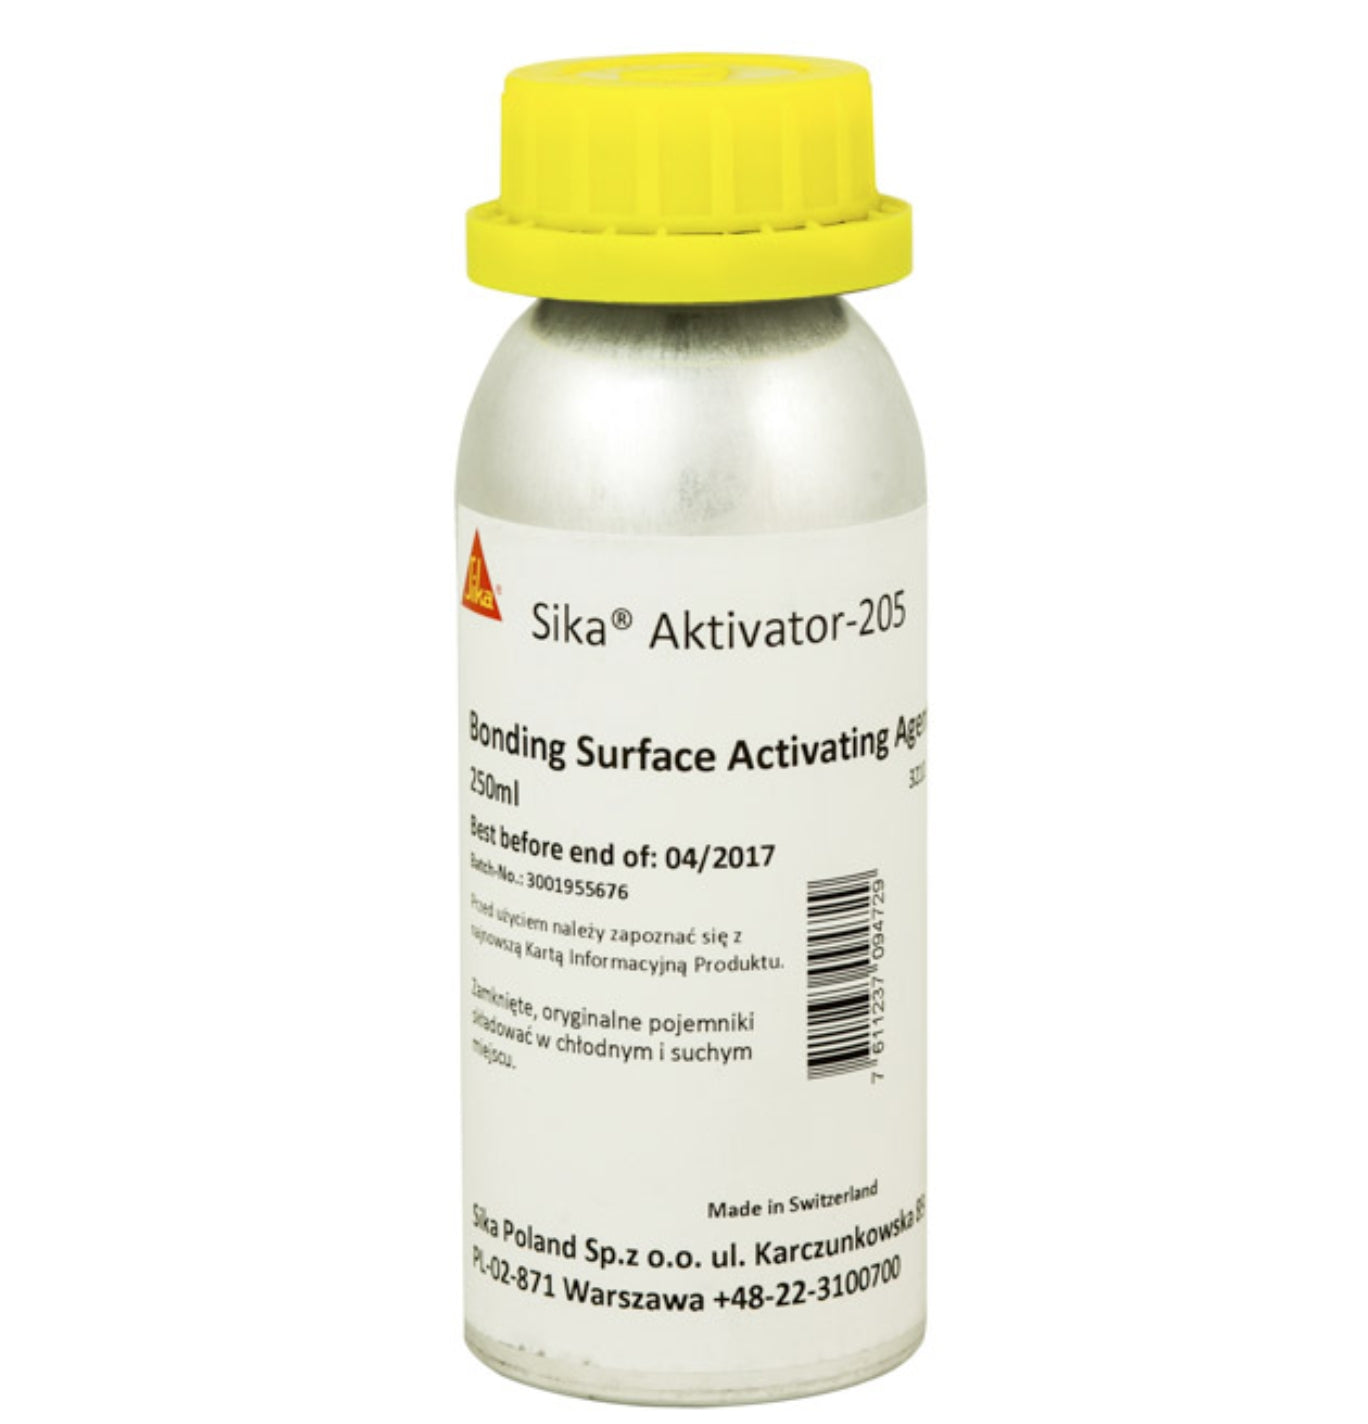 Sika Aktivator 205 Cleaner | 250ml Image